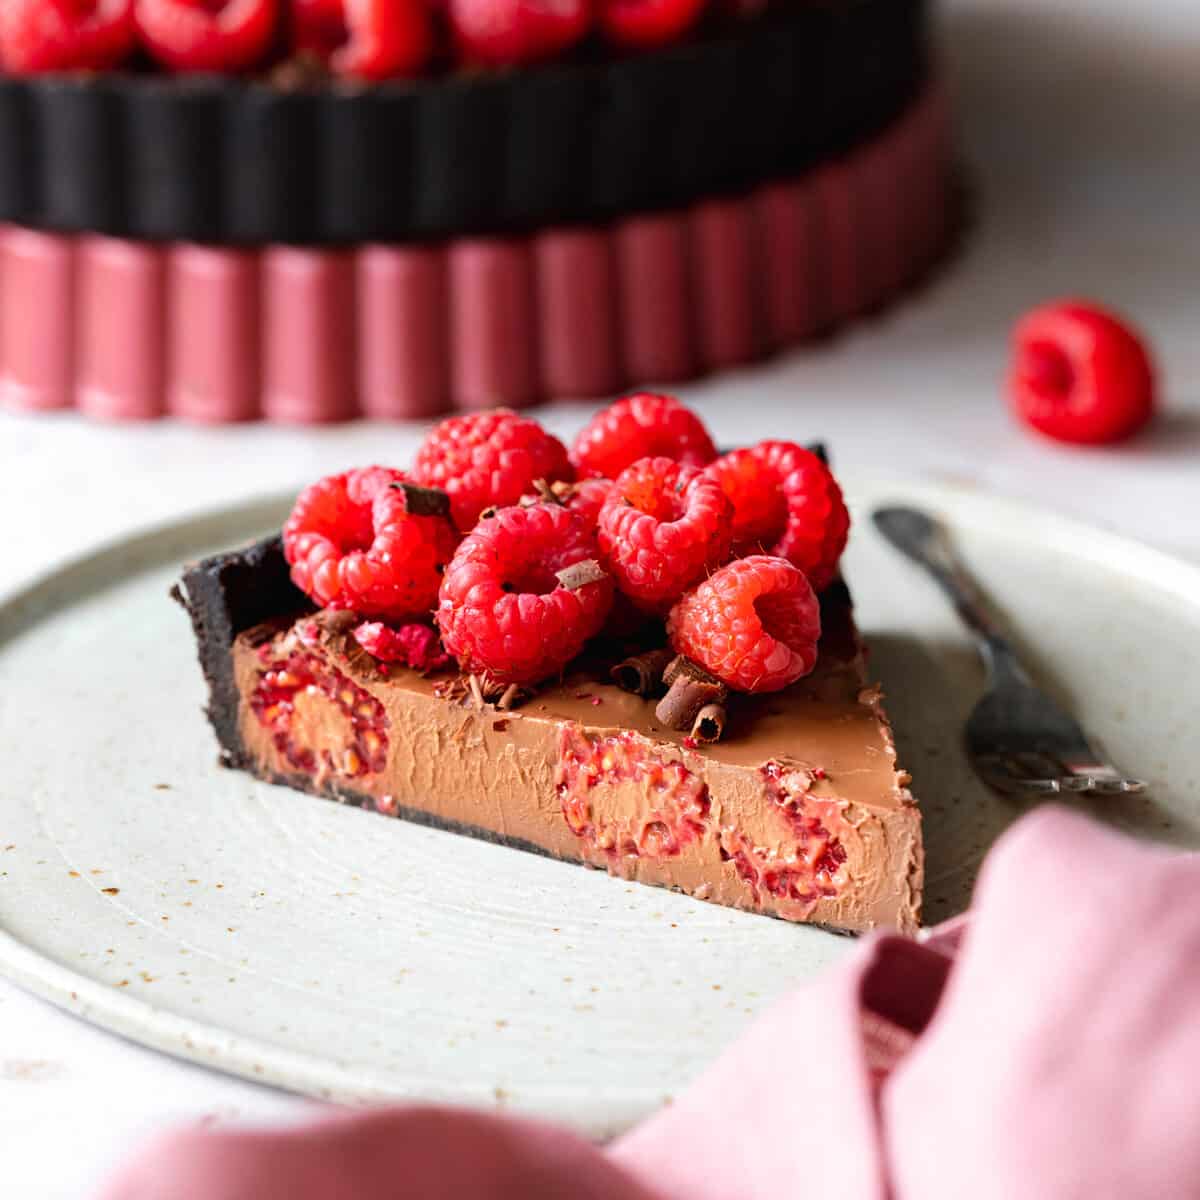 slice of chocolate ganache tart with raspberries on top, and pink linen in the foreground.